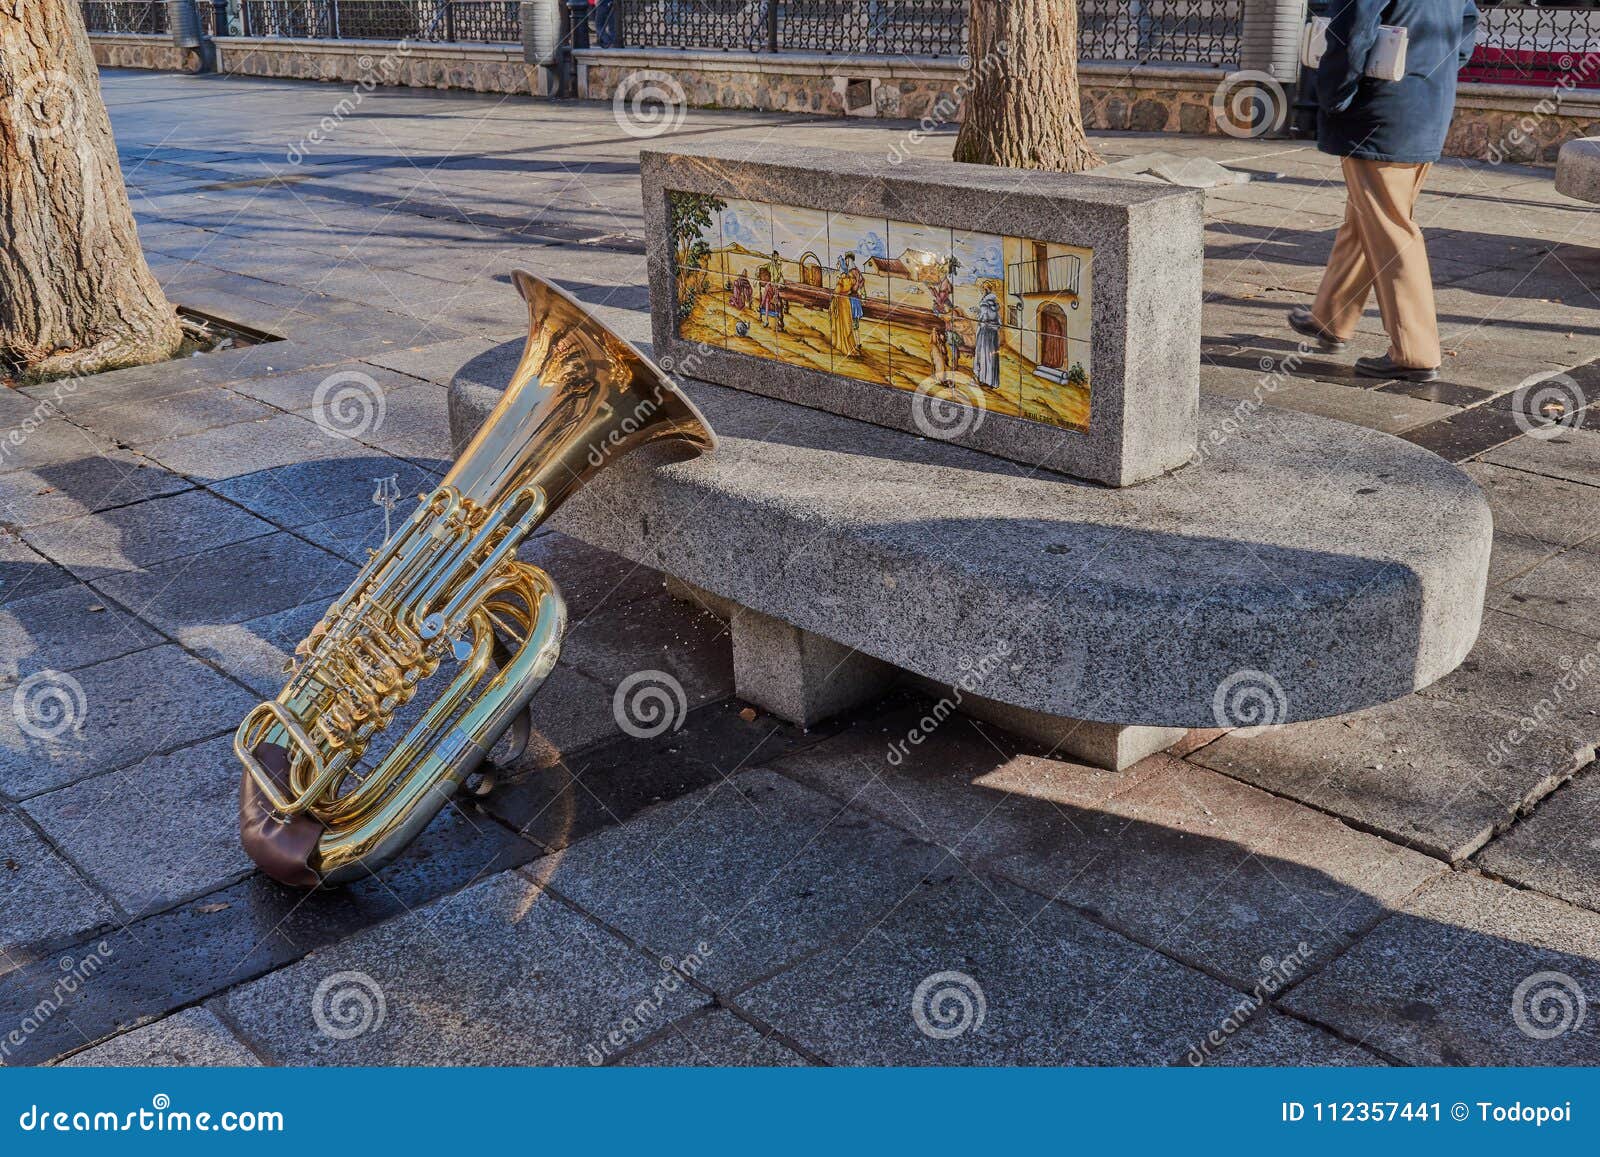 beautiful and bright tuba resting on a stone bench with ornament in the plaza de zocodover, spain